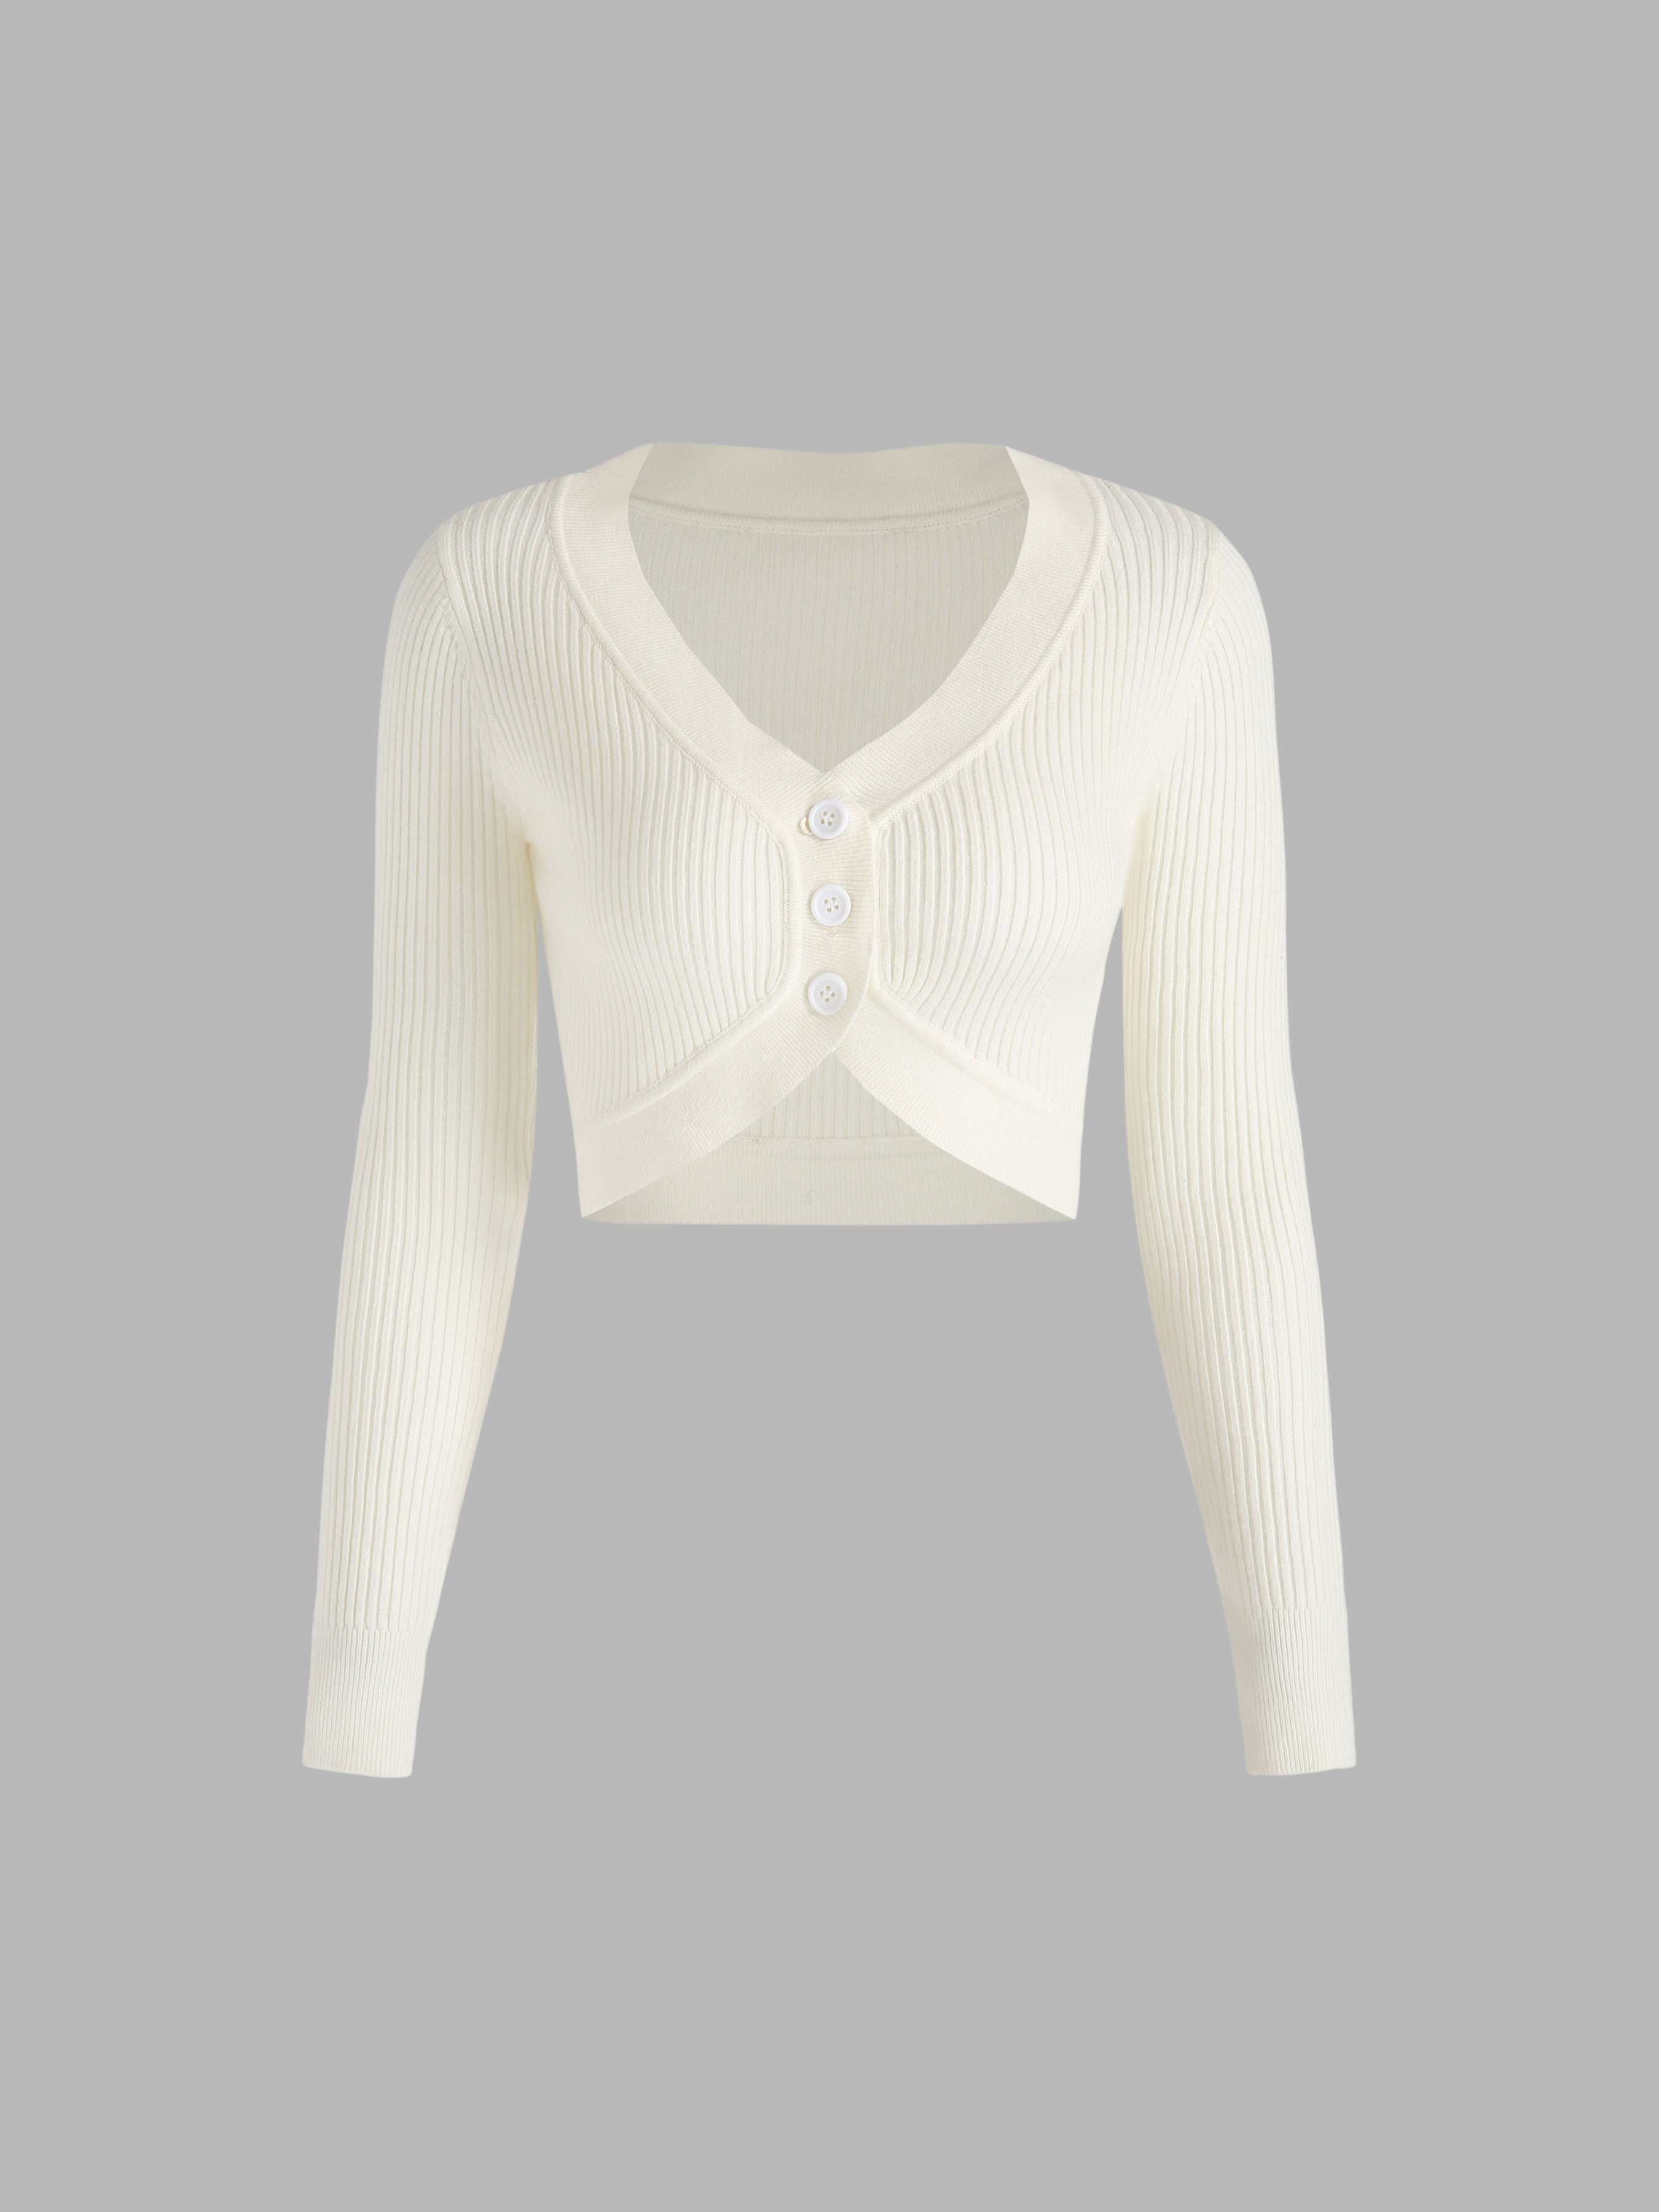 White Cropped Cardigan - Cider